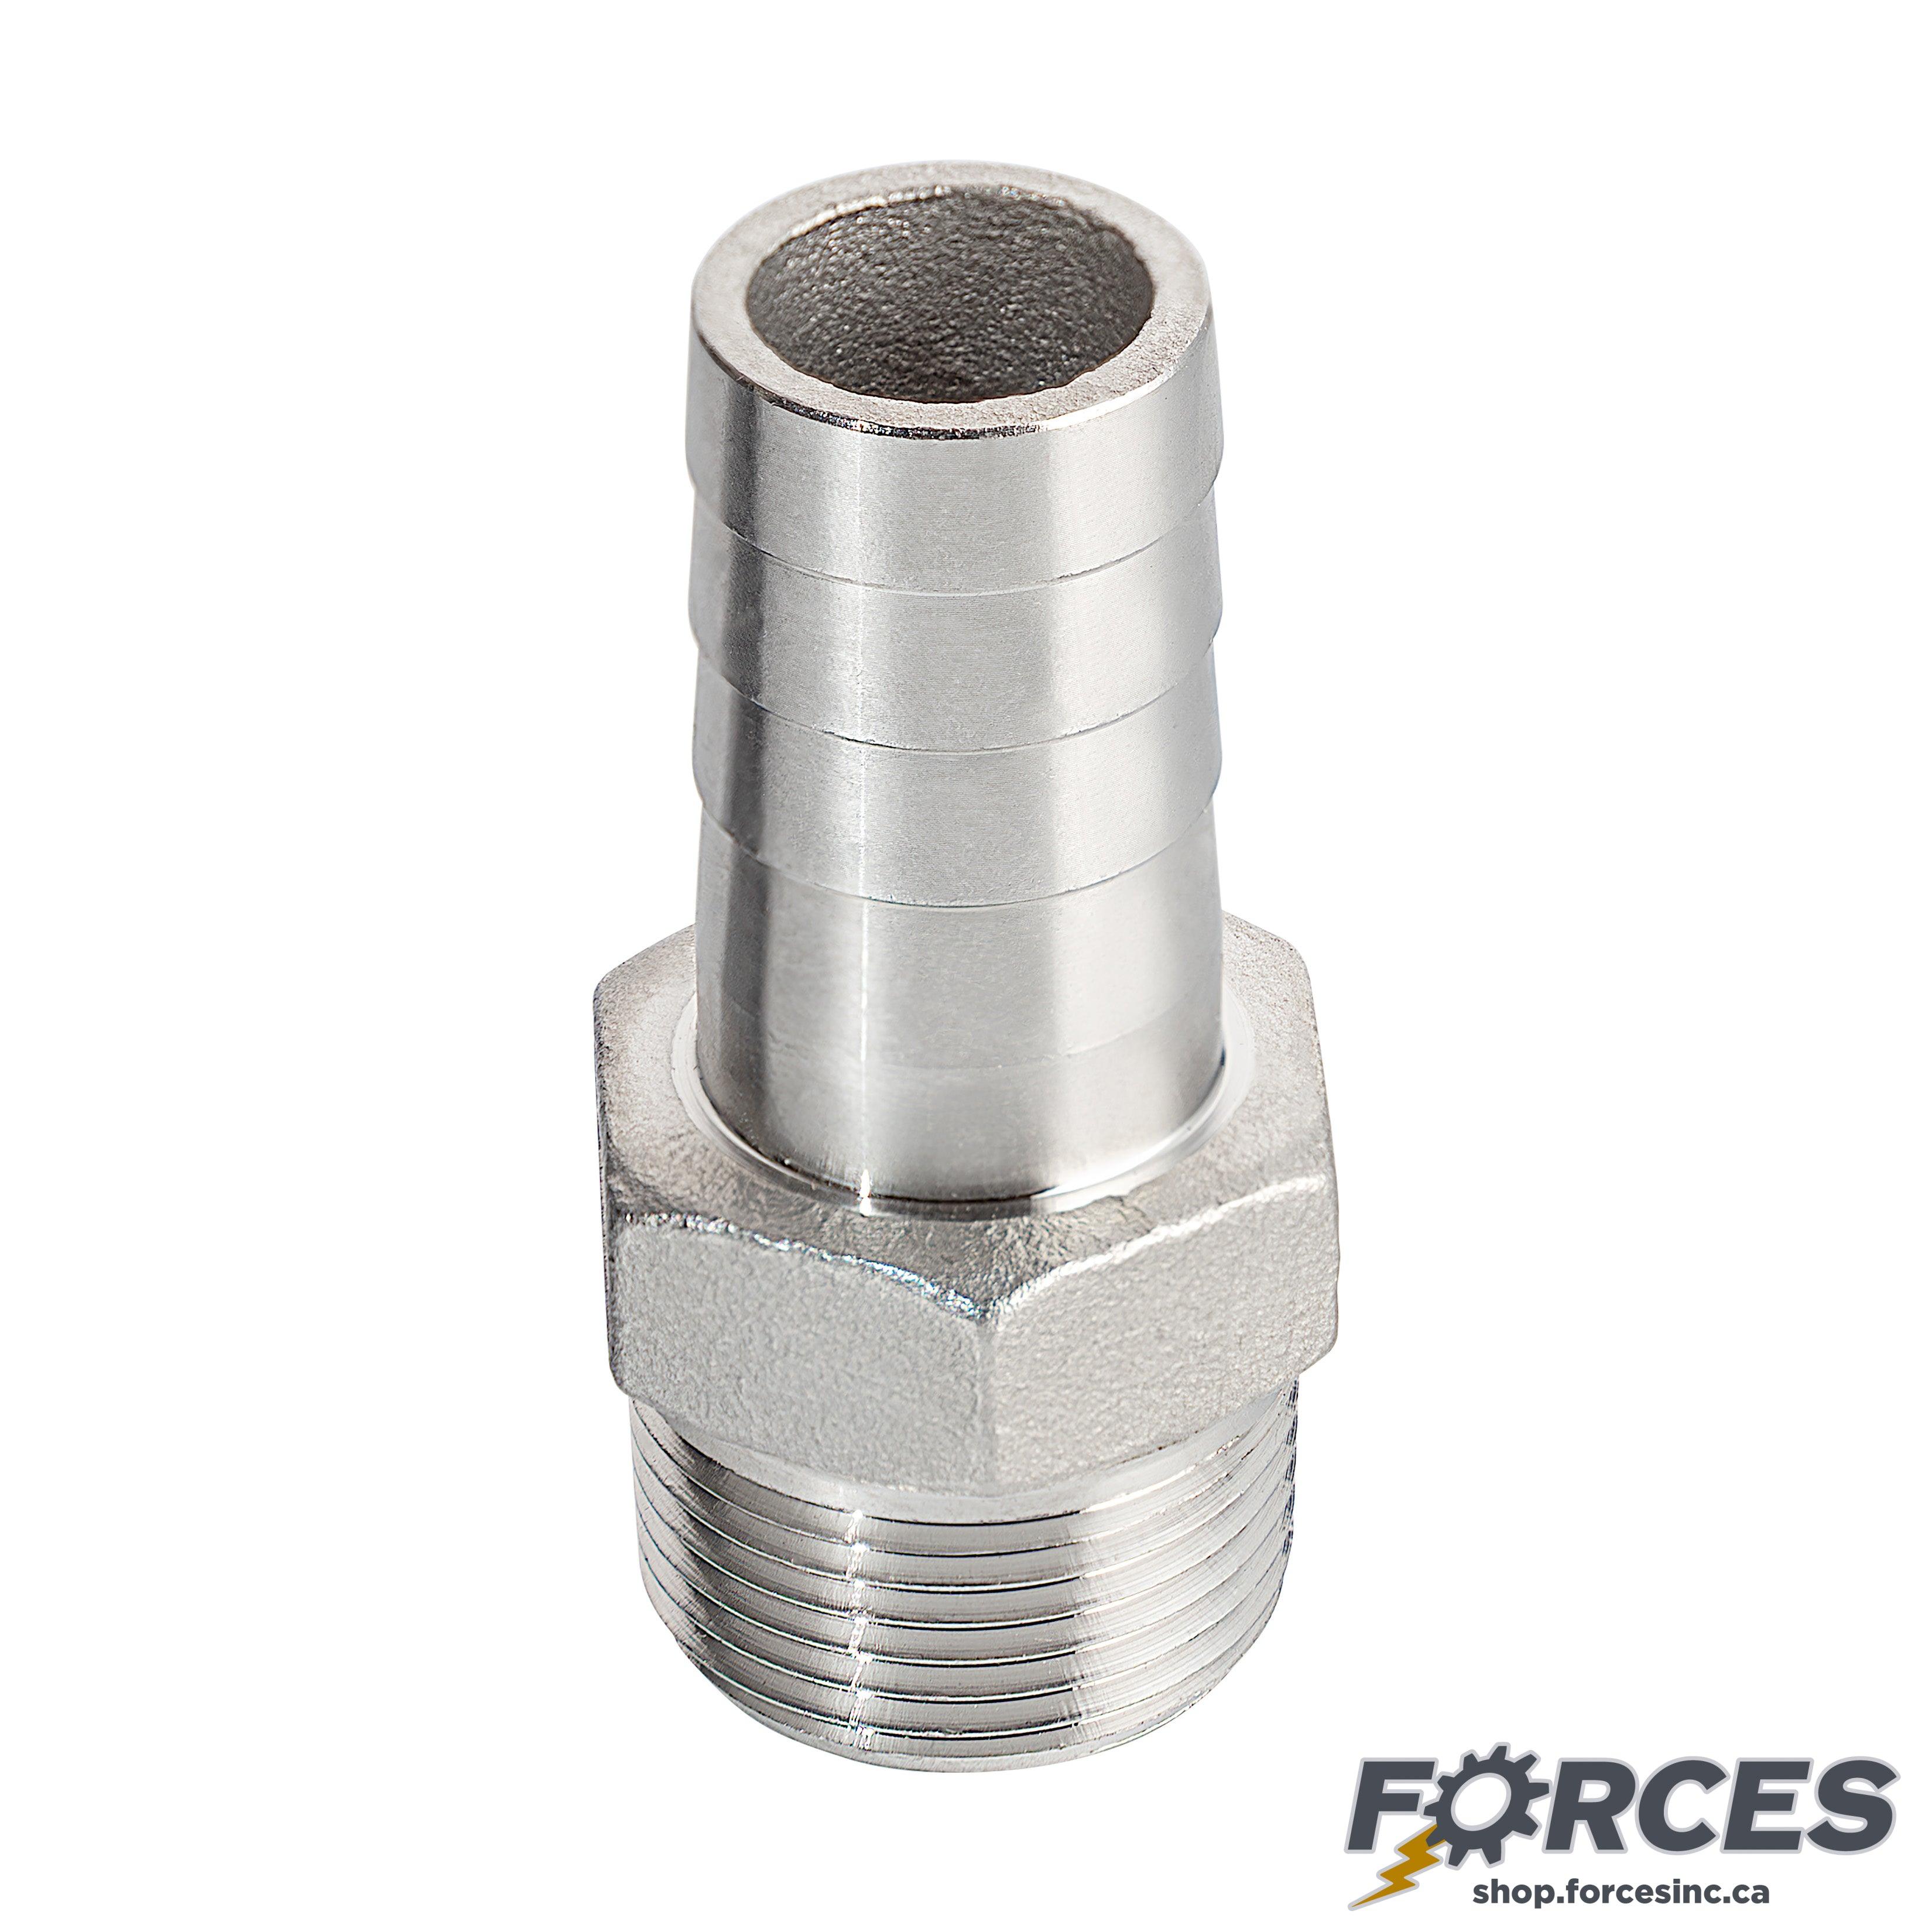 Hose Barb 1-1/2" x 1-1/2" NPT #150 - Stainless Steel 316 - Forces Inc